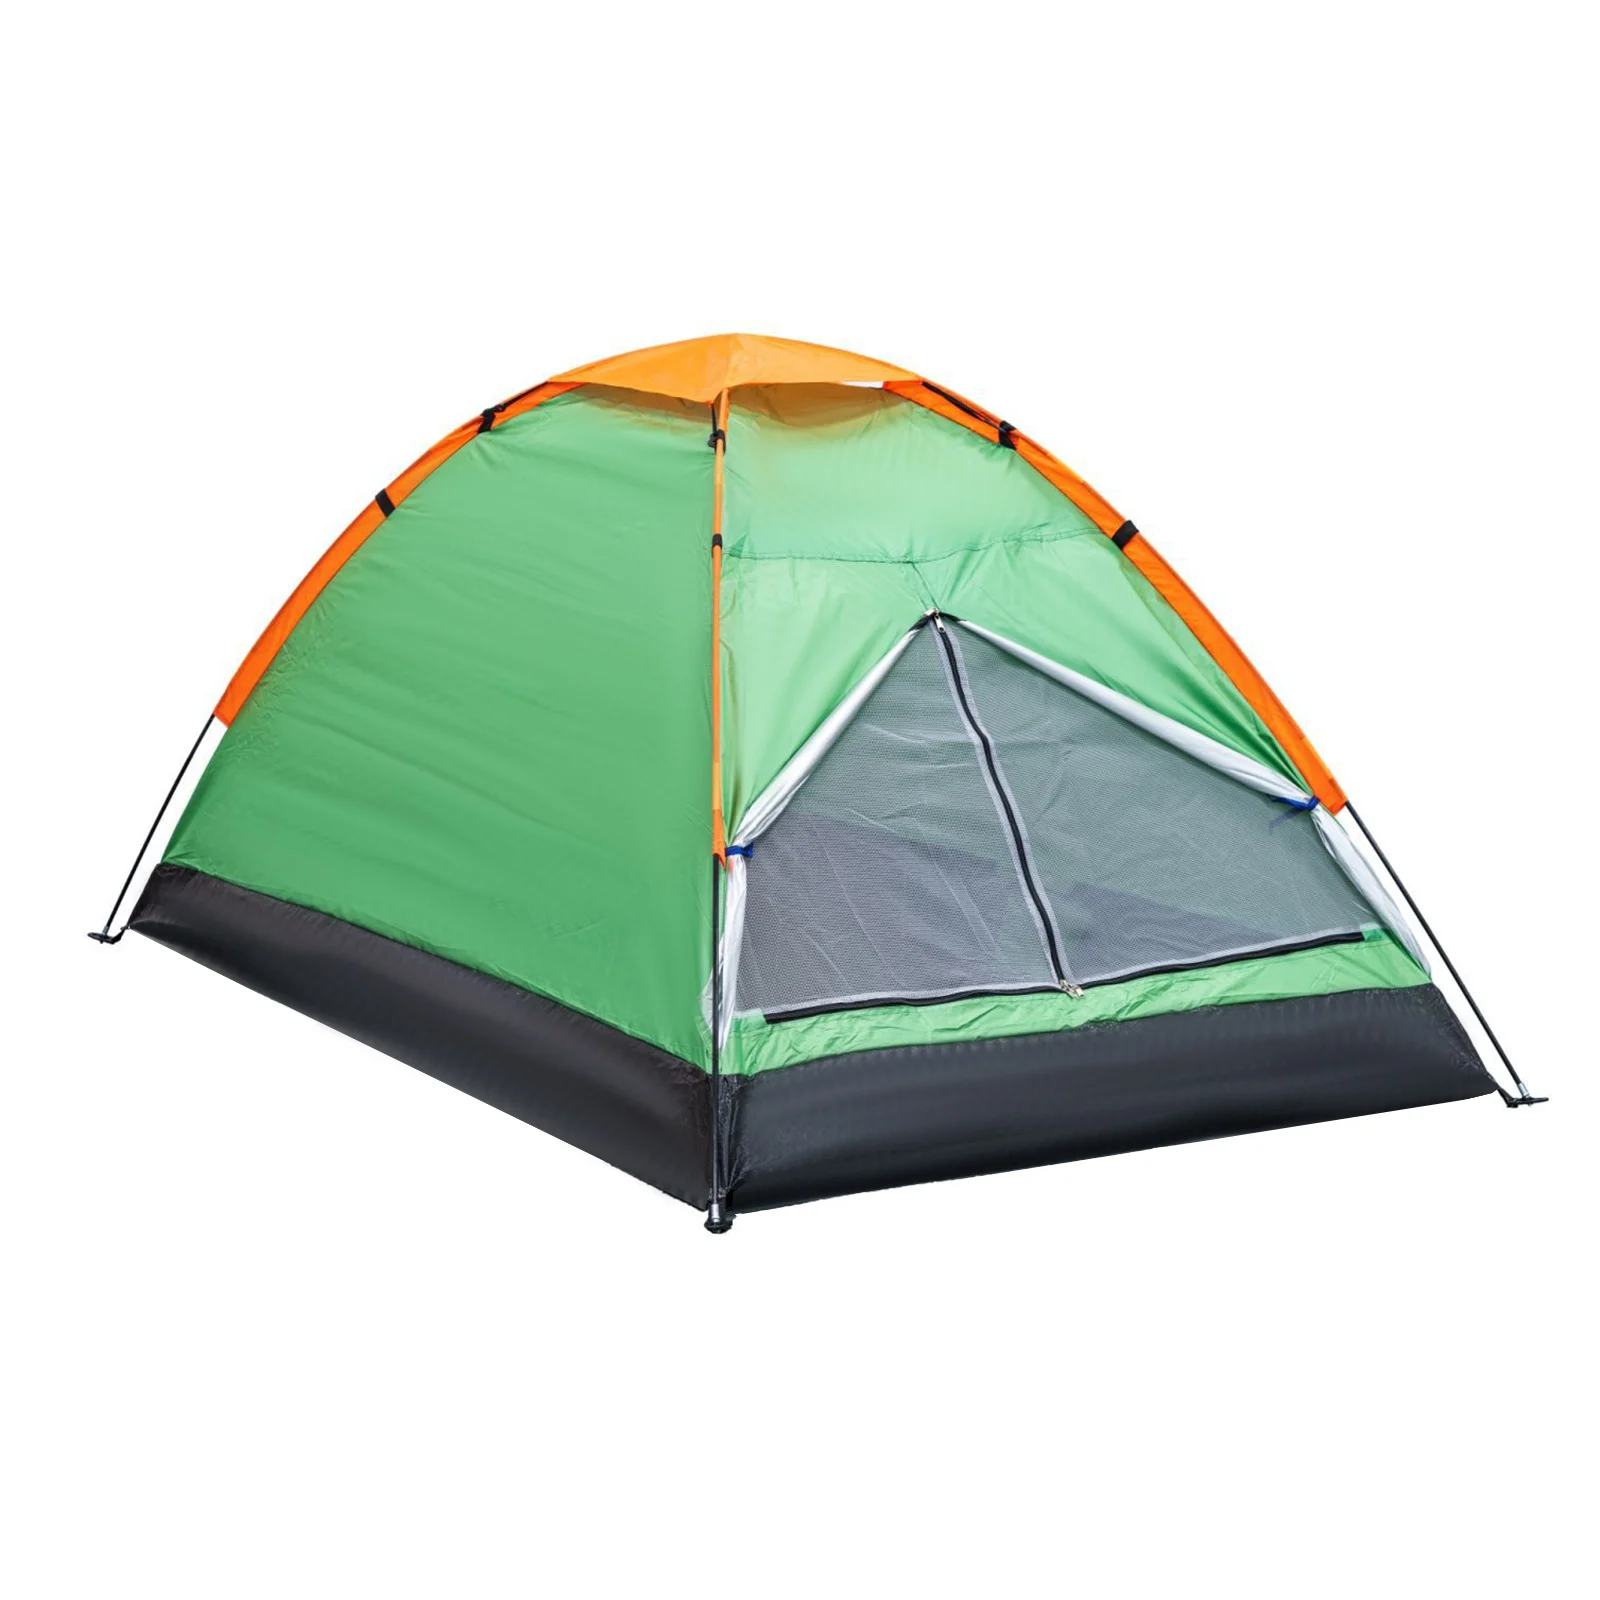 

Canopies Tent Wakeman With Carrying Bag 190T Polyester 2-Person Backpacking Camping Indoor/outdoor Lightweight